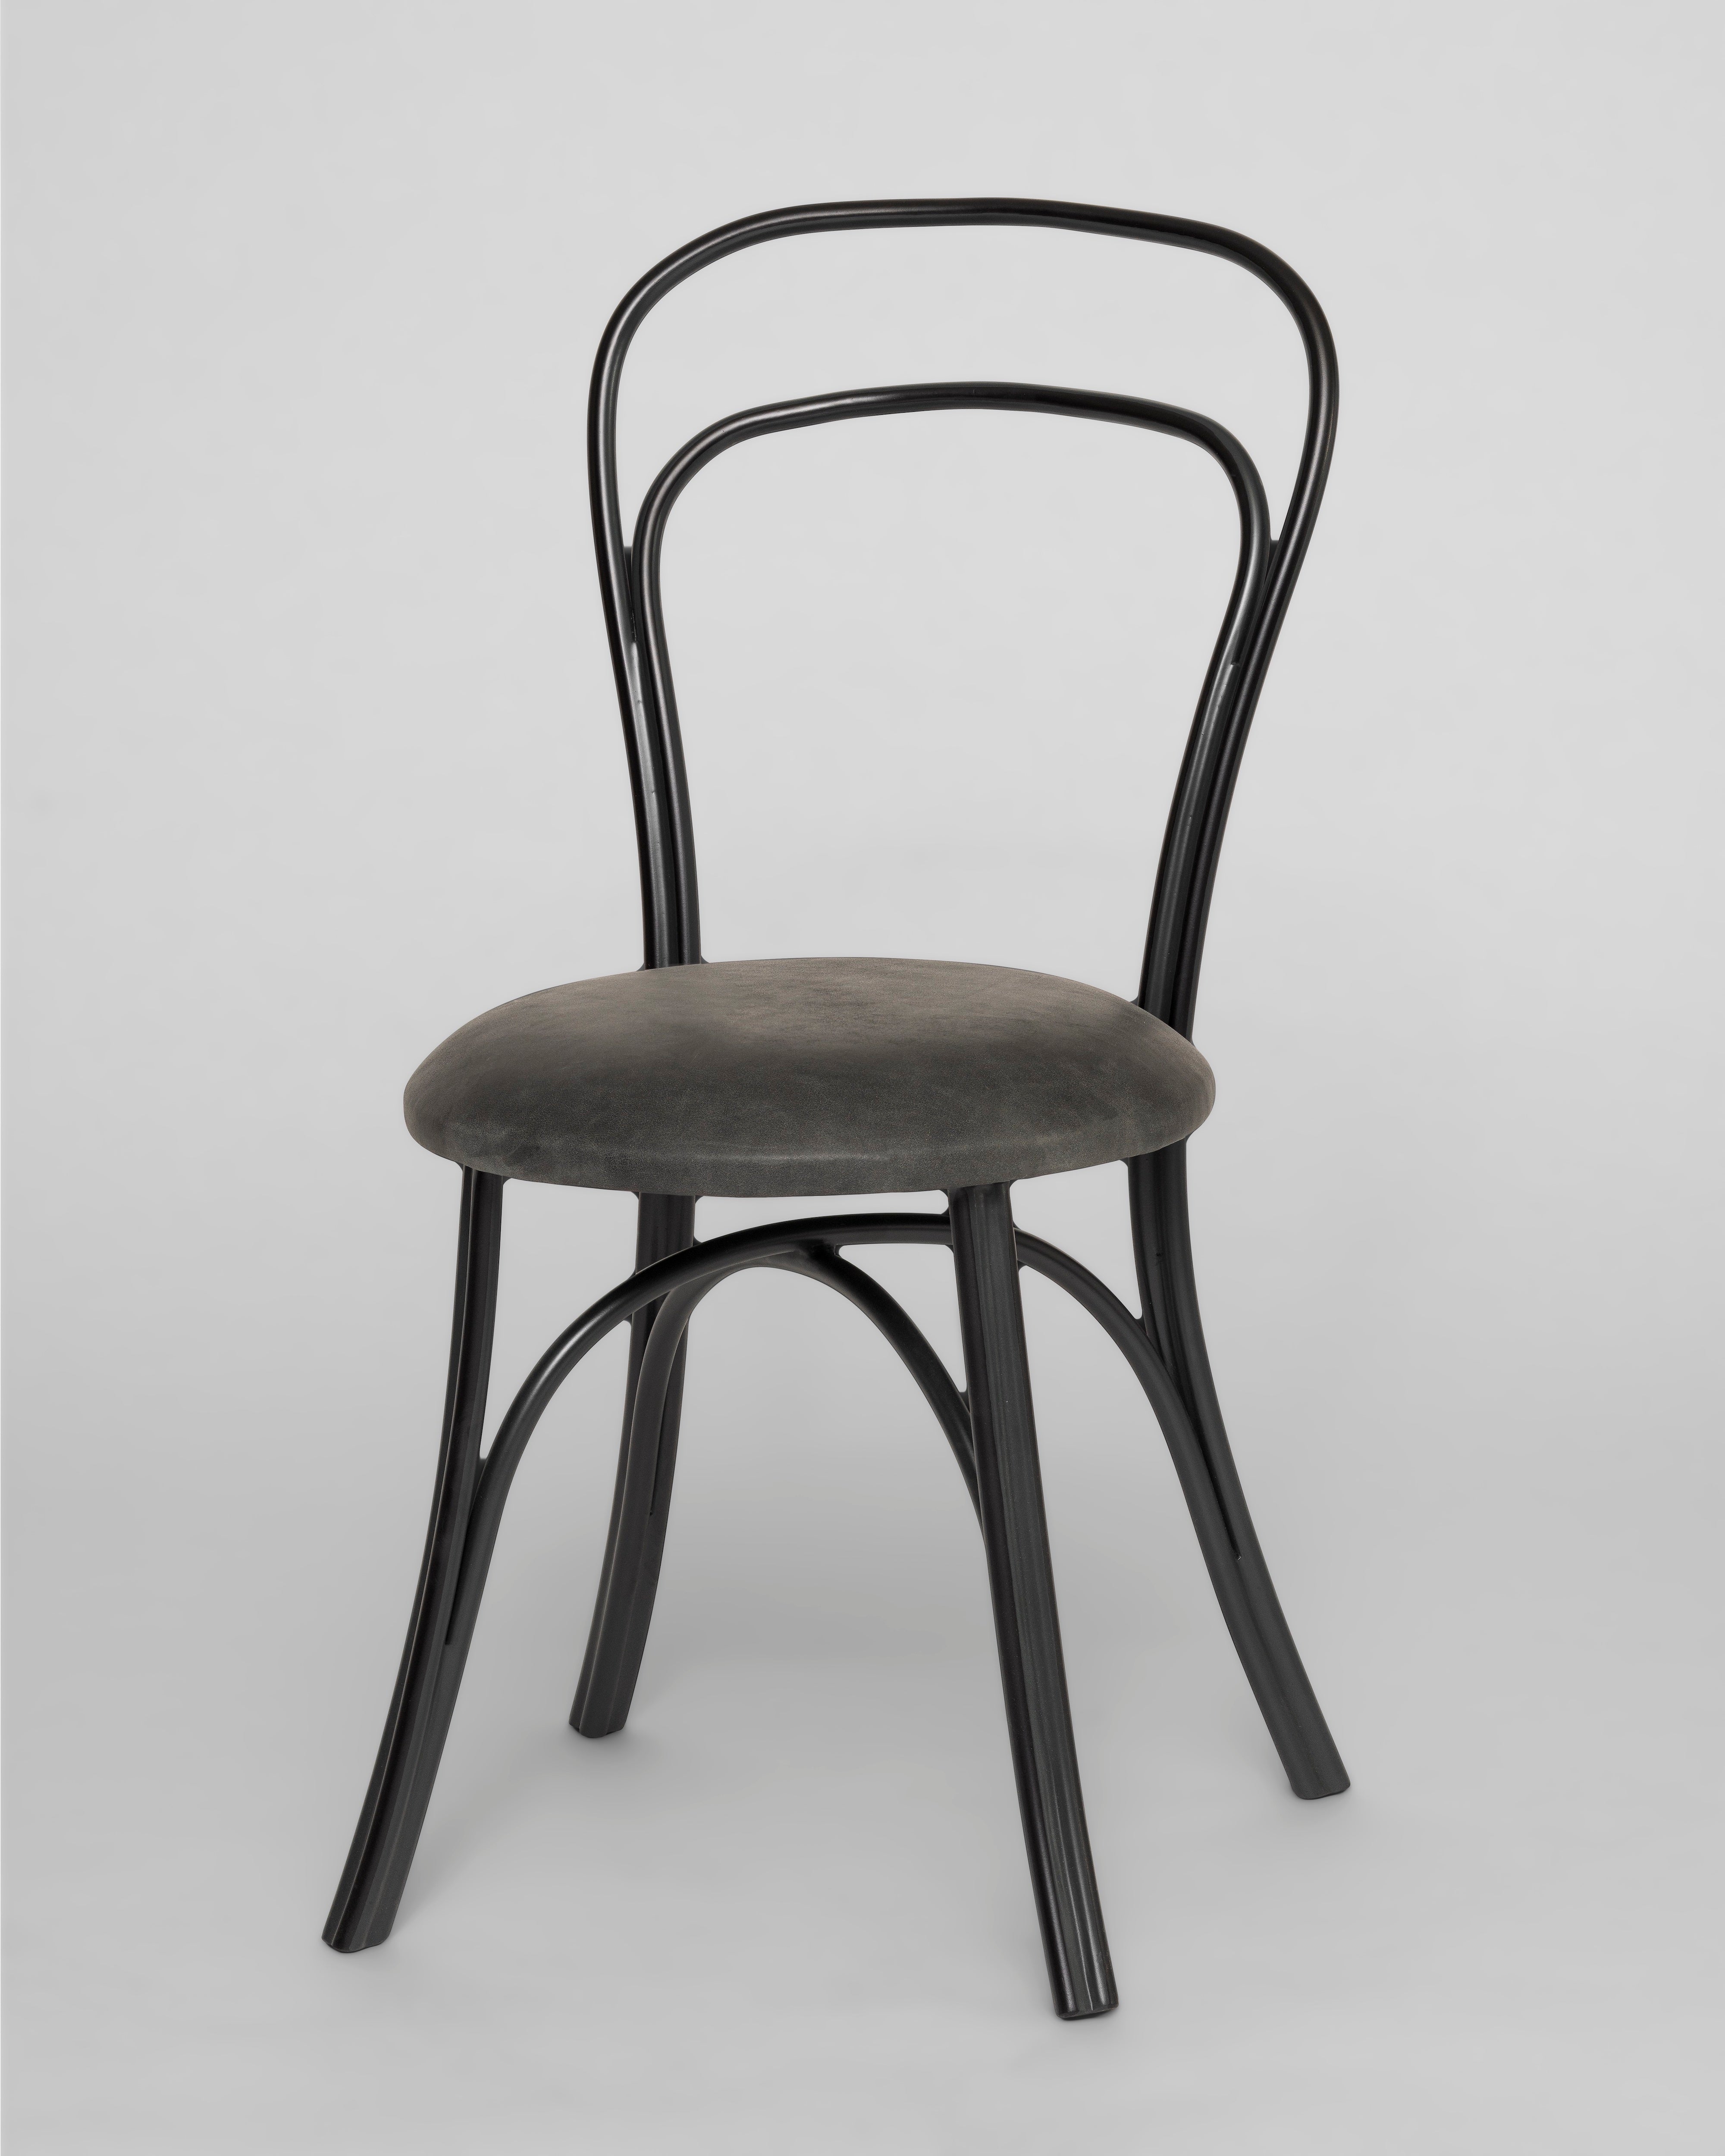 Daley Bistro Chair Shown in Superior with Distressed Anthracite leather